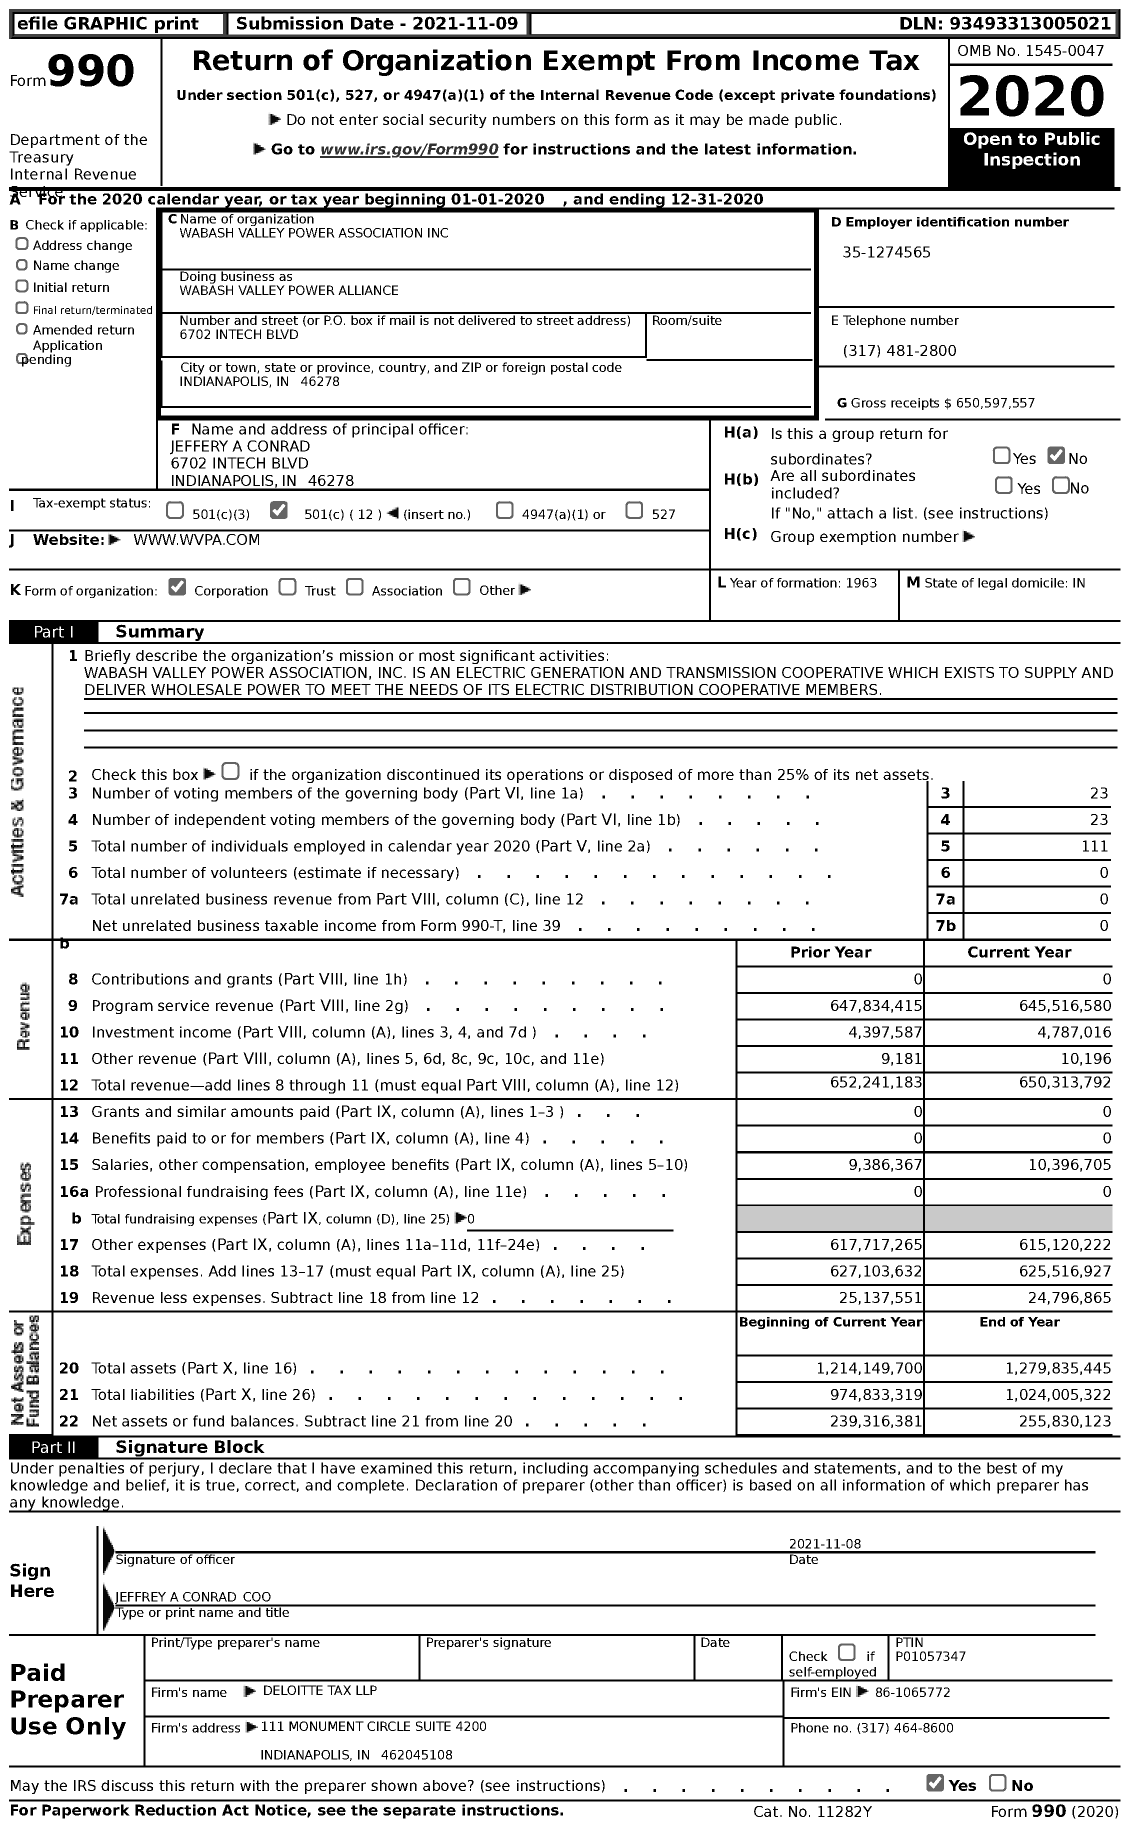 Image of first page of 2020 Form 990 for Wabash Valley Power Alliance (WVPA)